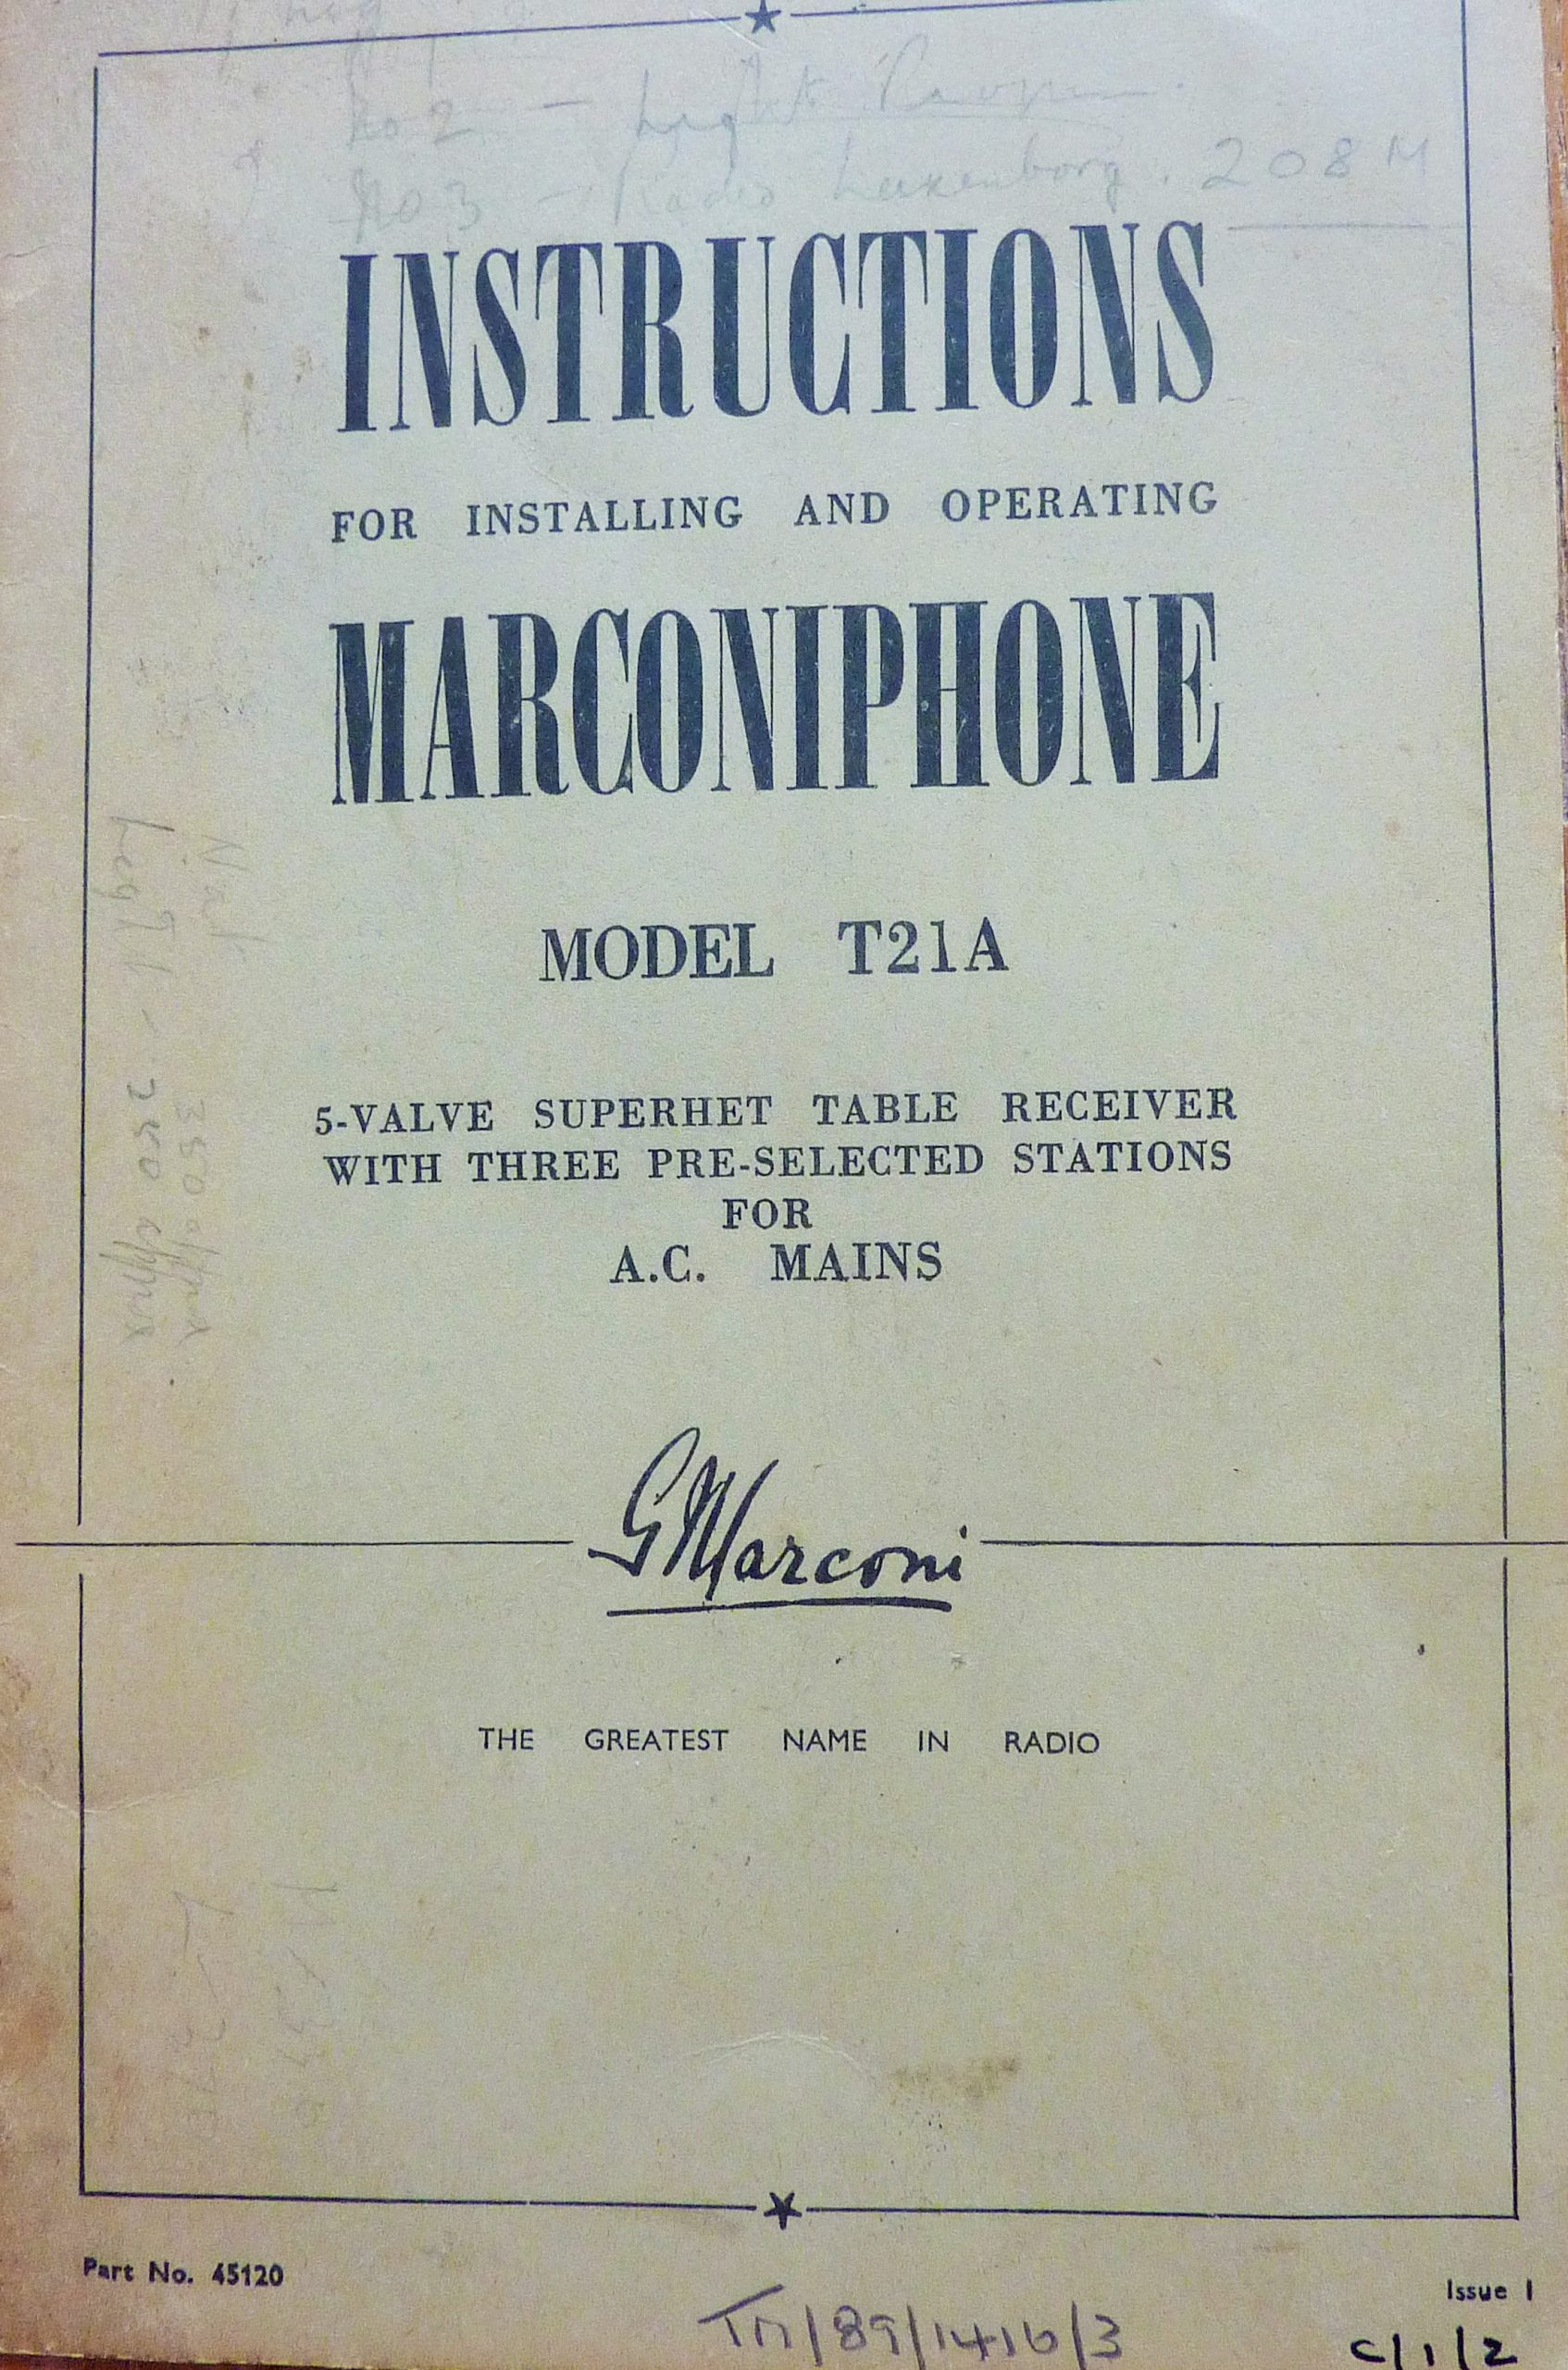 A leaflet with the words: Instructions for installing and operating Marconiphone Model T21A. 5 valve superhey table receiver with three pre-selected stations for A.C. Mains. G Marconi. The Greatest Name in Radio'. There are also some scribbled notes in pencil that are difficult to make out.